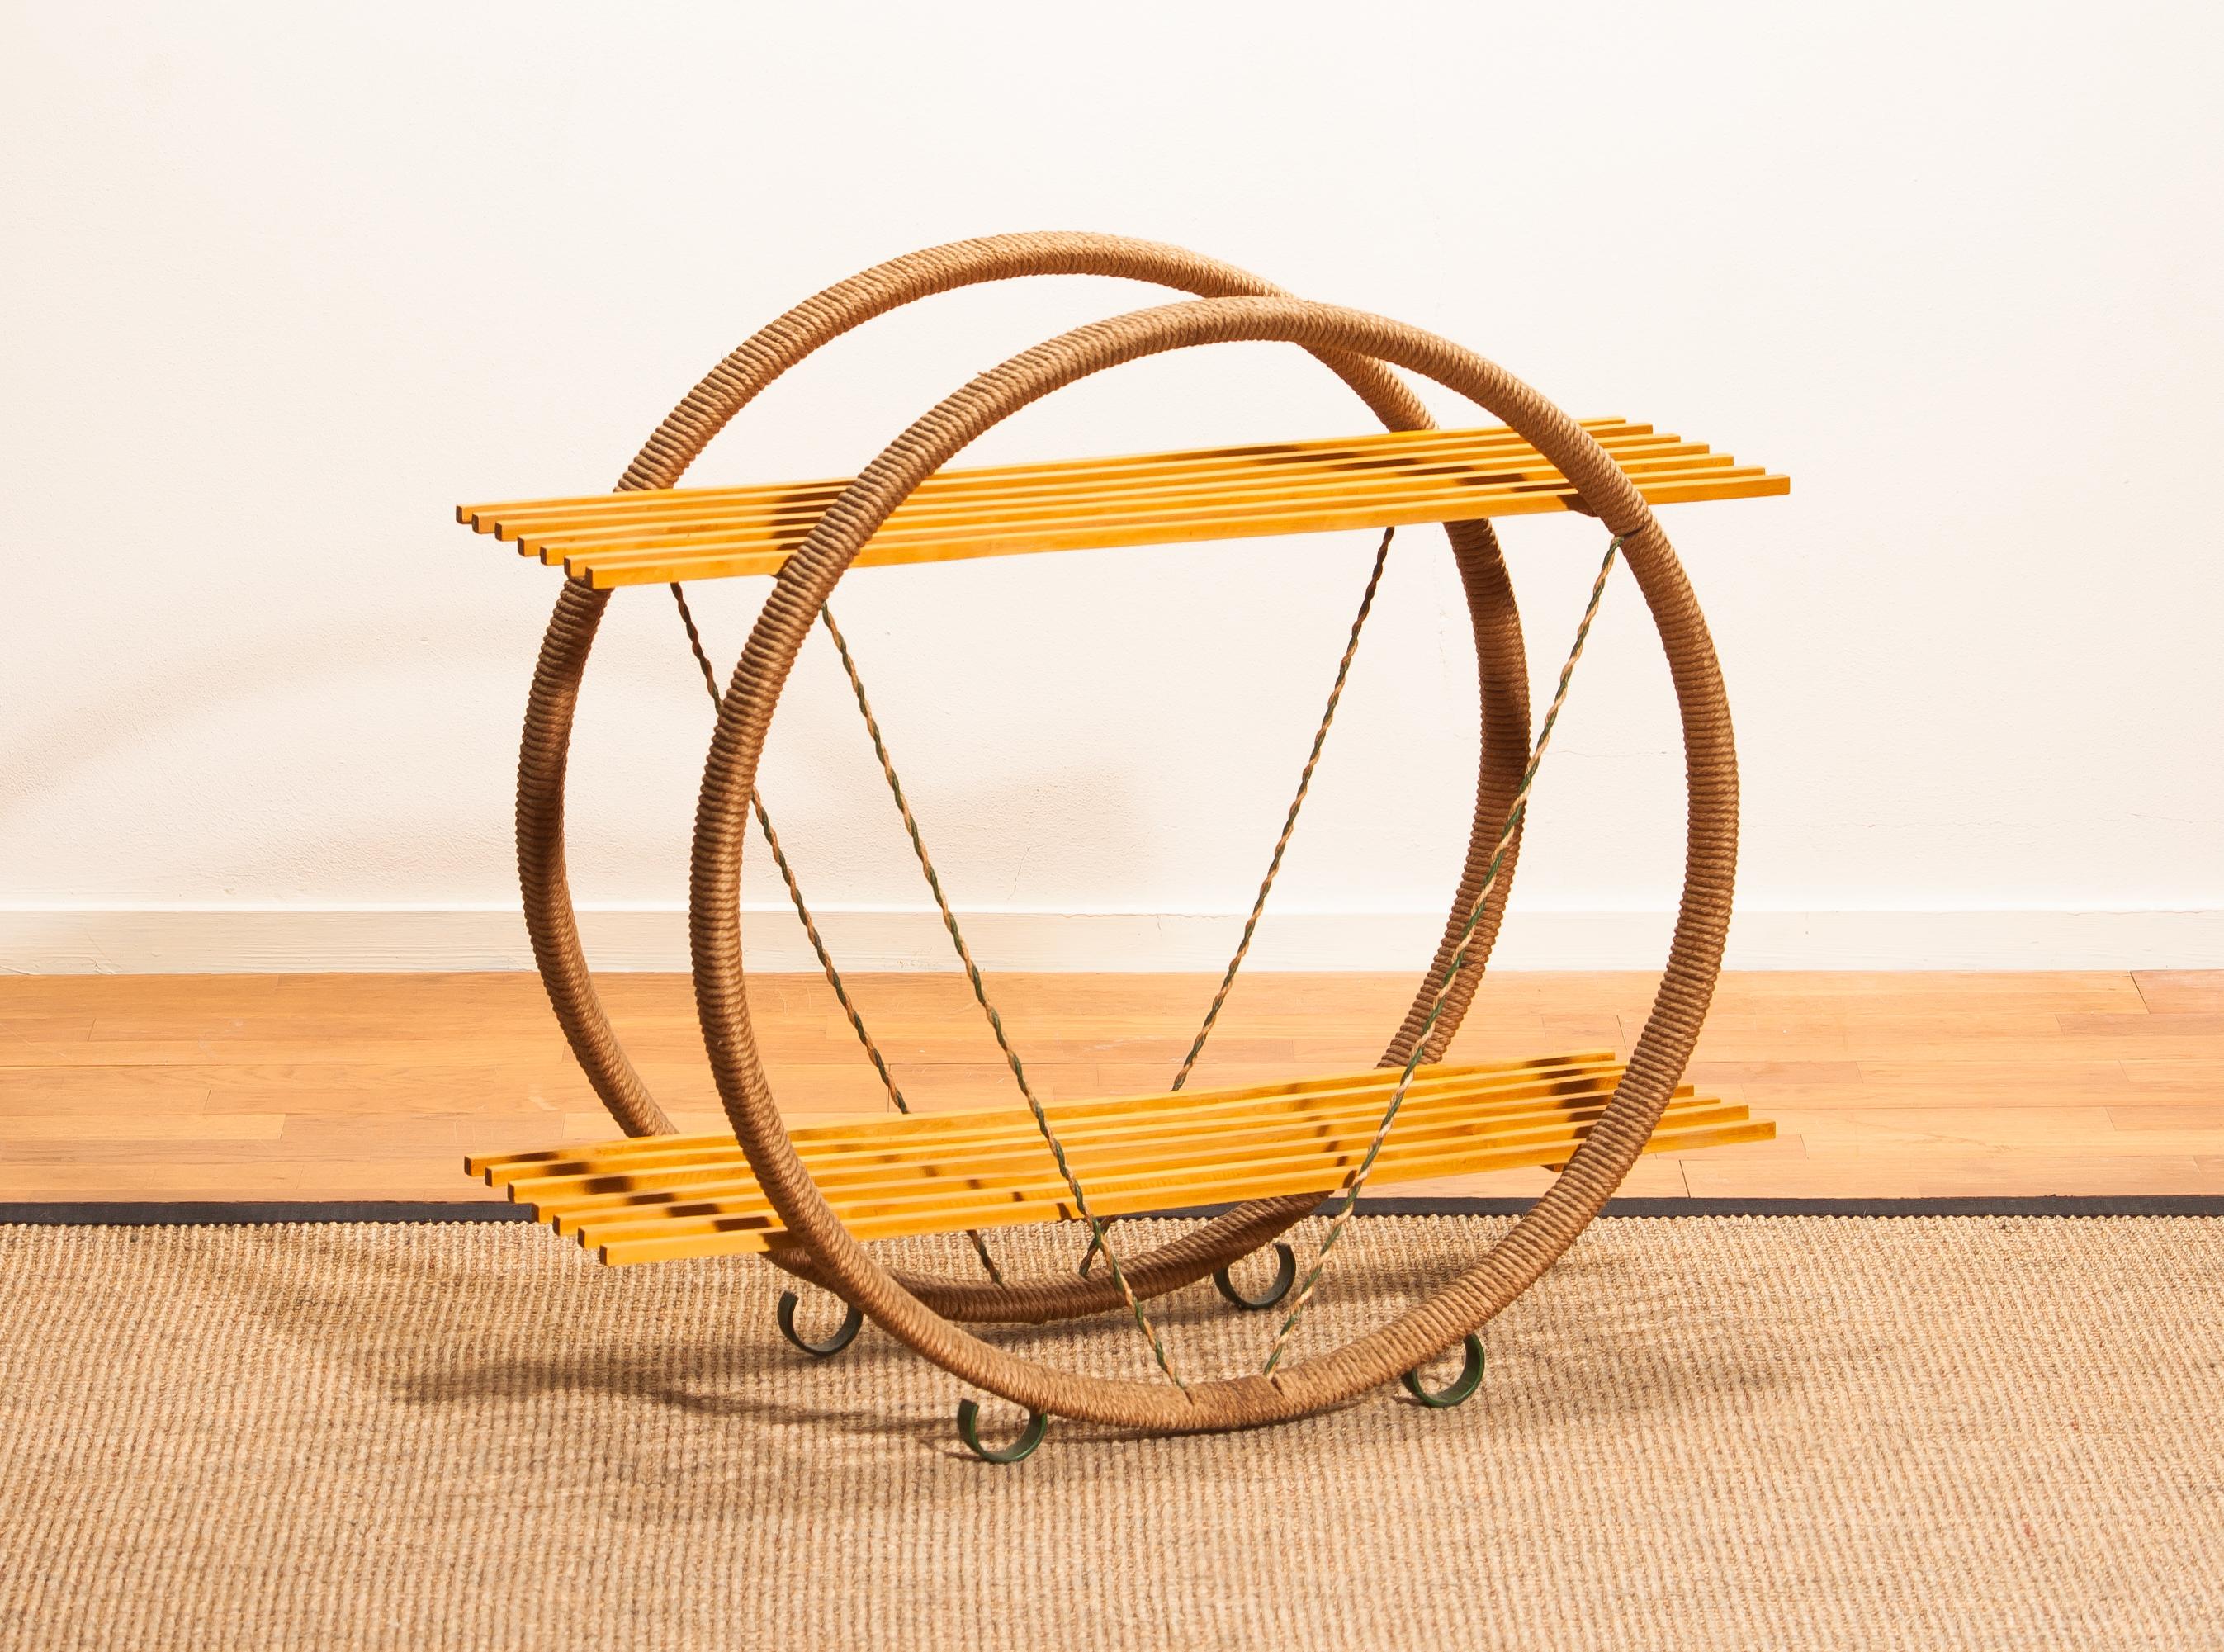 Extremely beautiful circular metal shelves cabinet wrapped with sisal/paper-cord.
This rare cabinet is made in Sweden.
Period 1940s.
The dimensions are:
Total height 66 cm - 26 inch
Wide 74 cm - 29 inch
Depth 31 cm - 12 inch
ø of the circles